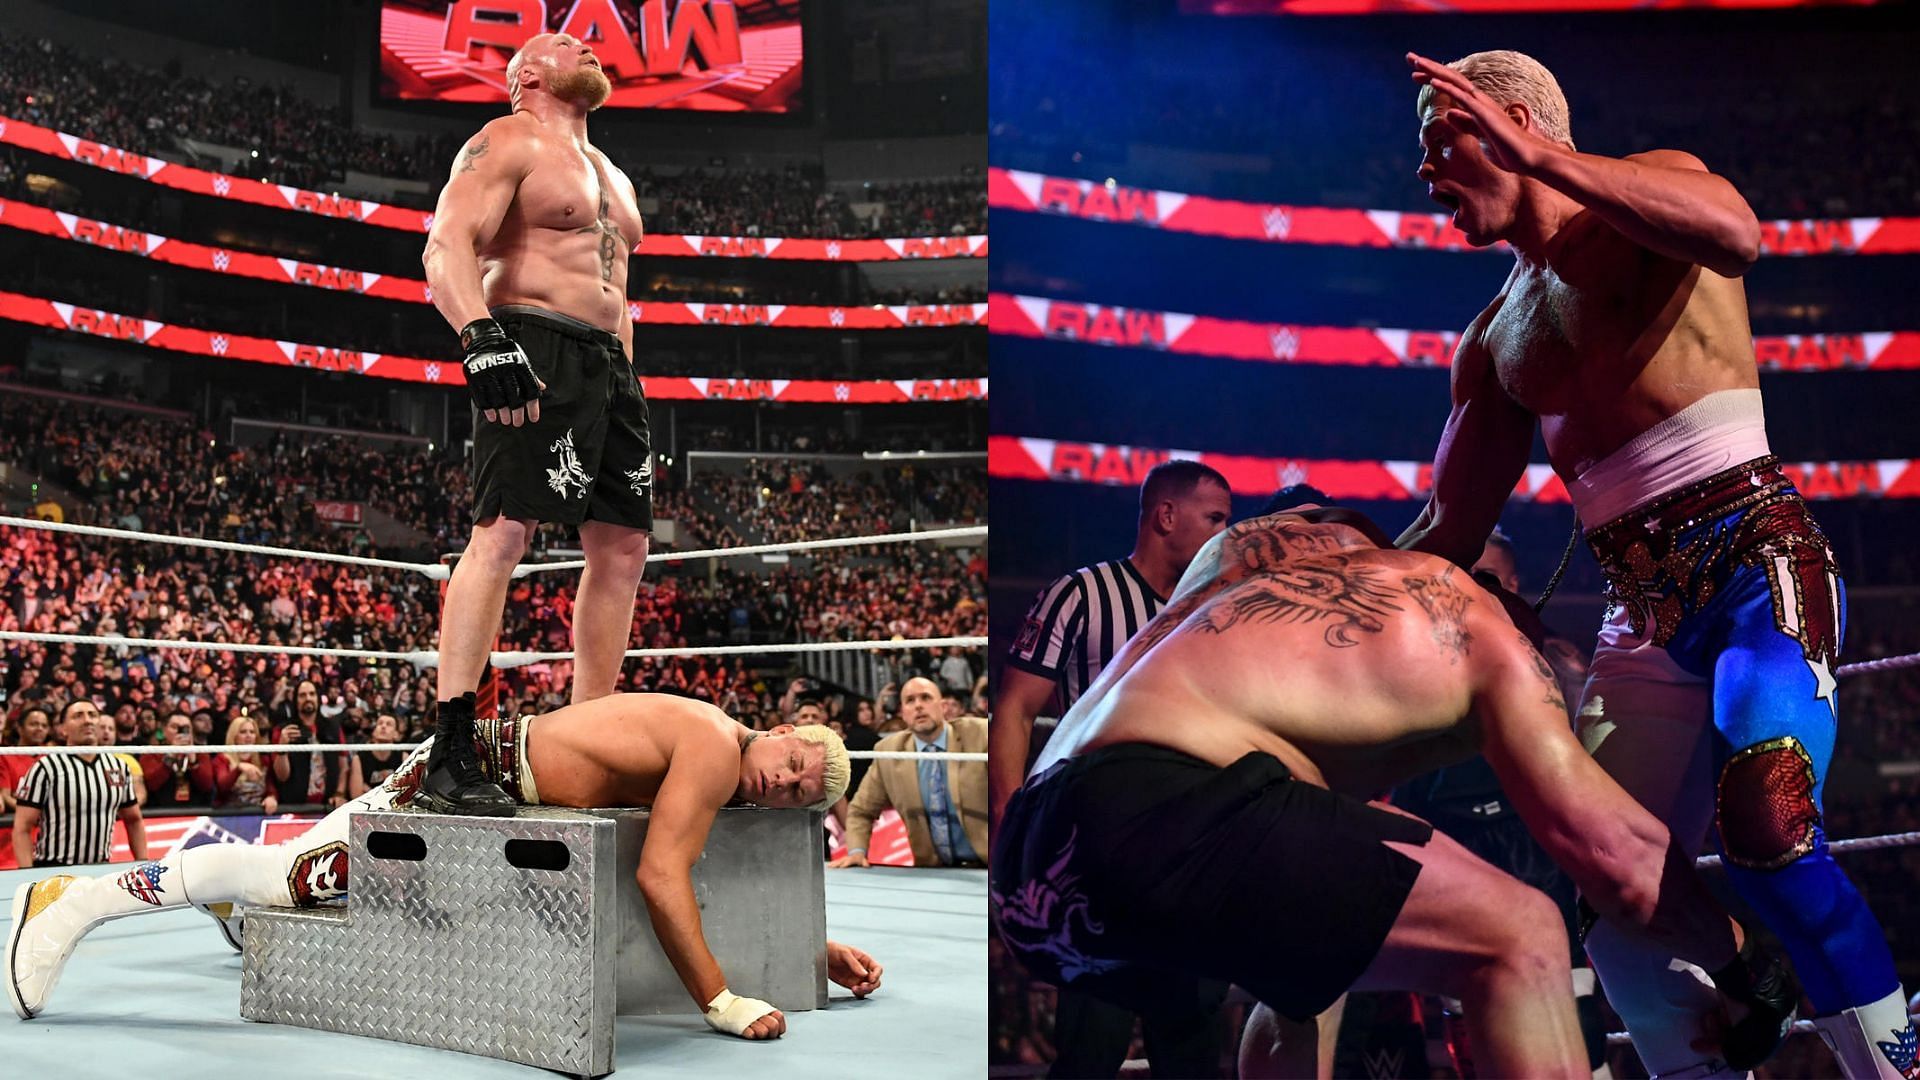 Brock Lesnar and Cody Rhodes shared quite the segment on WWE RAW